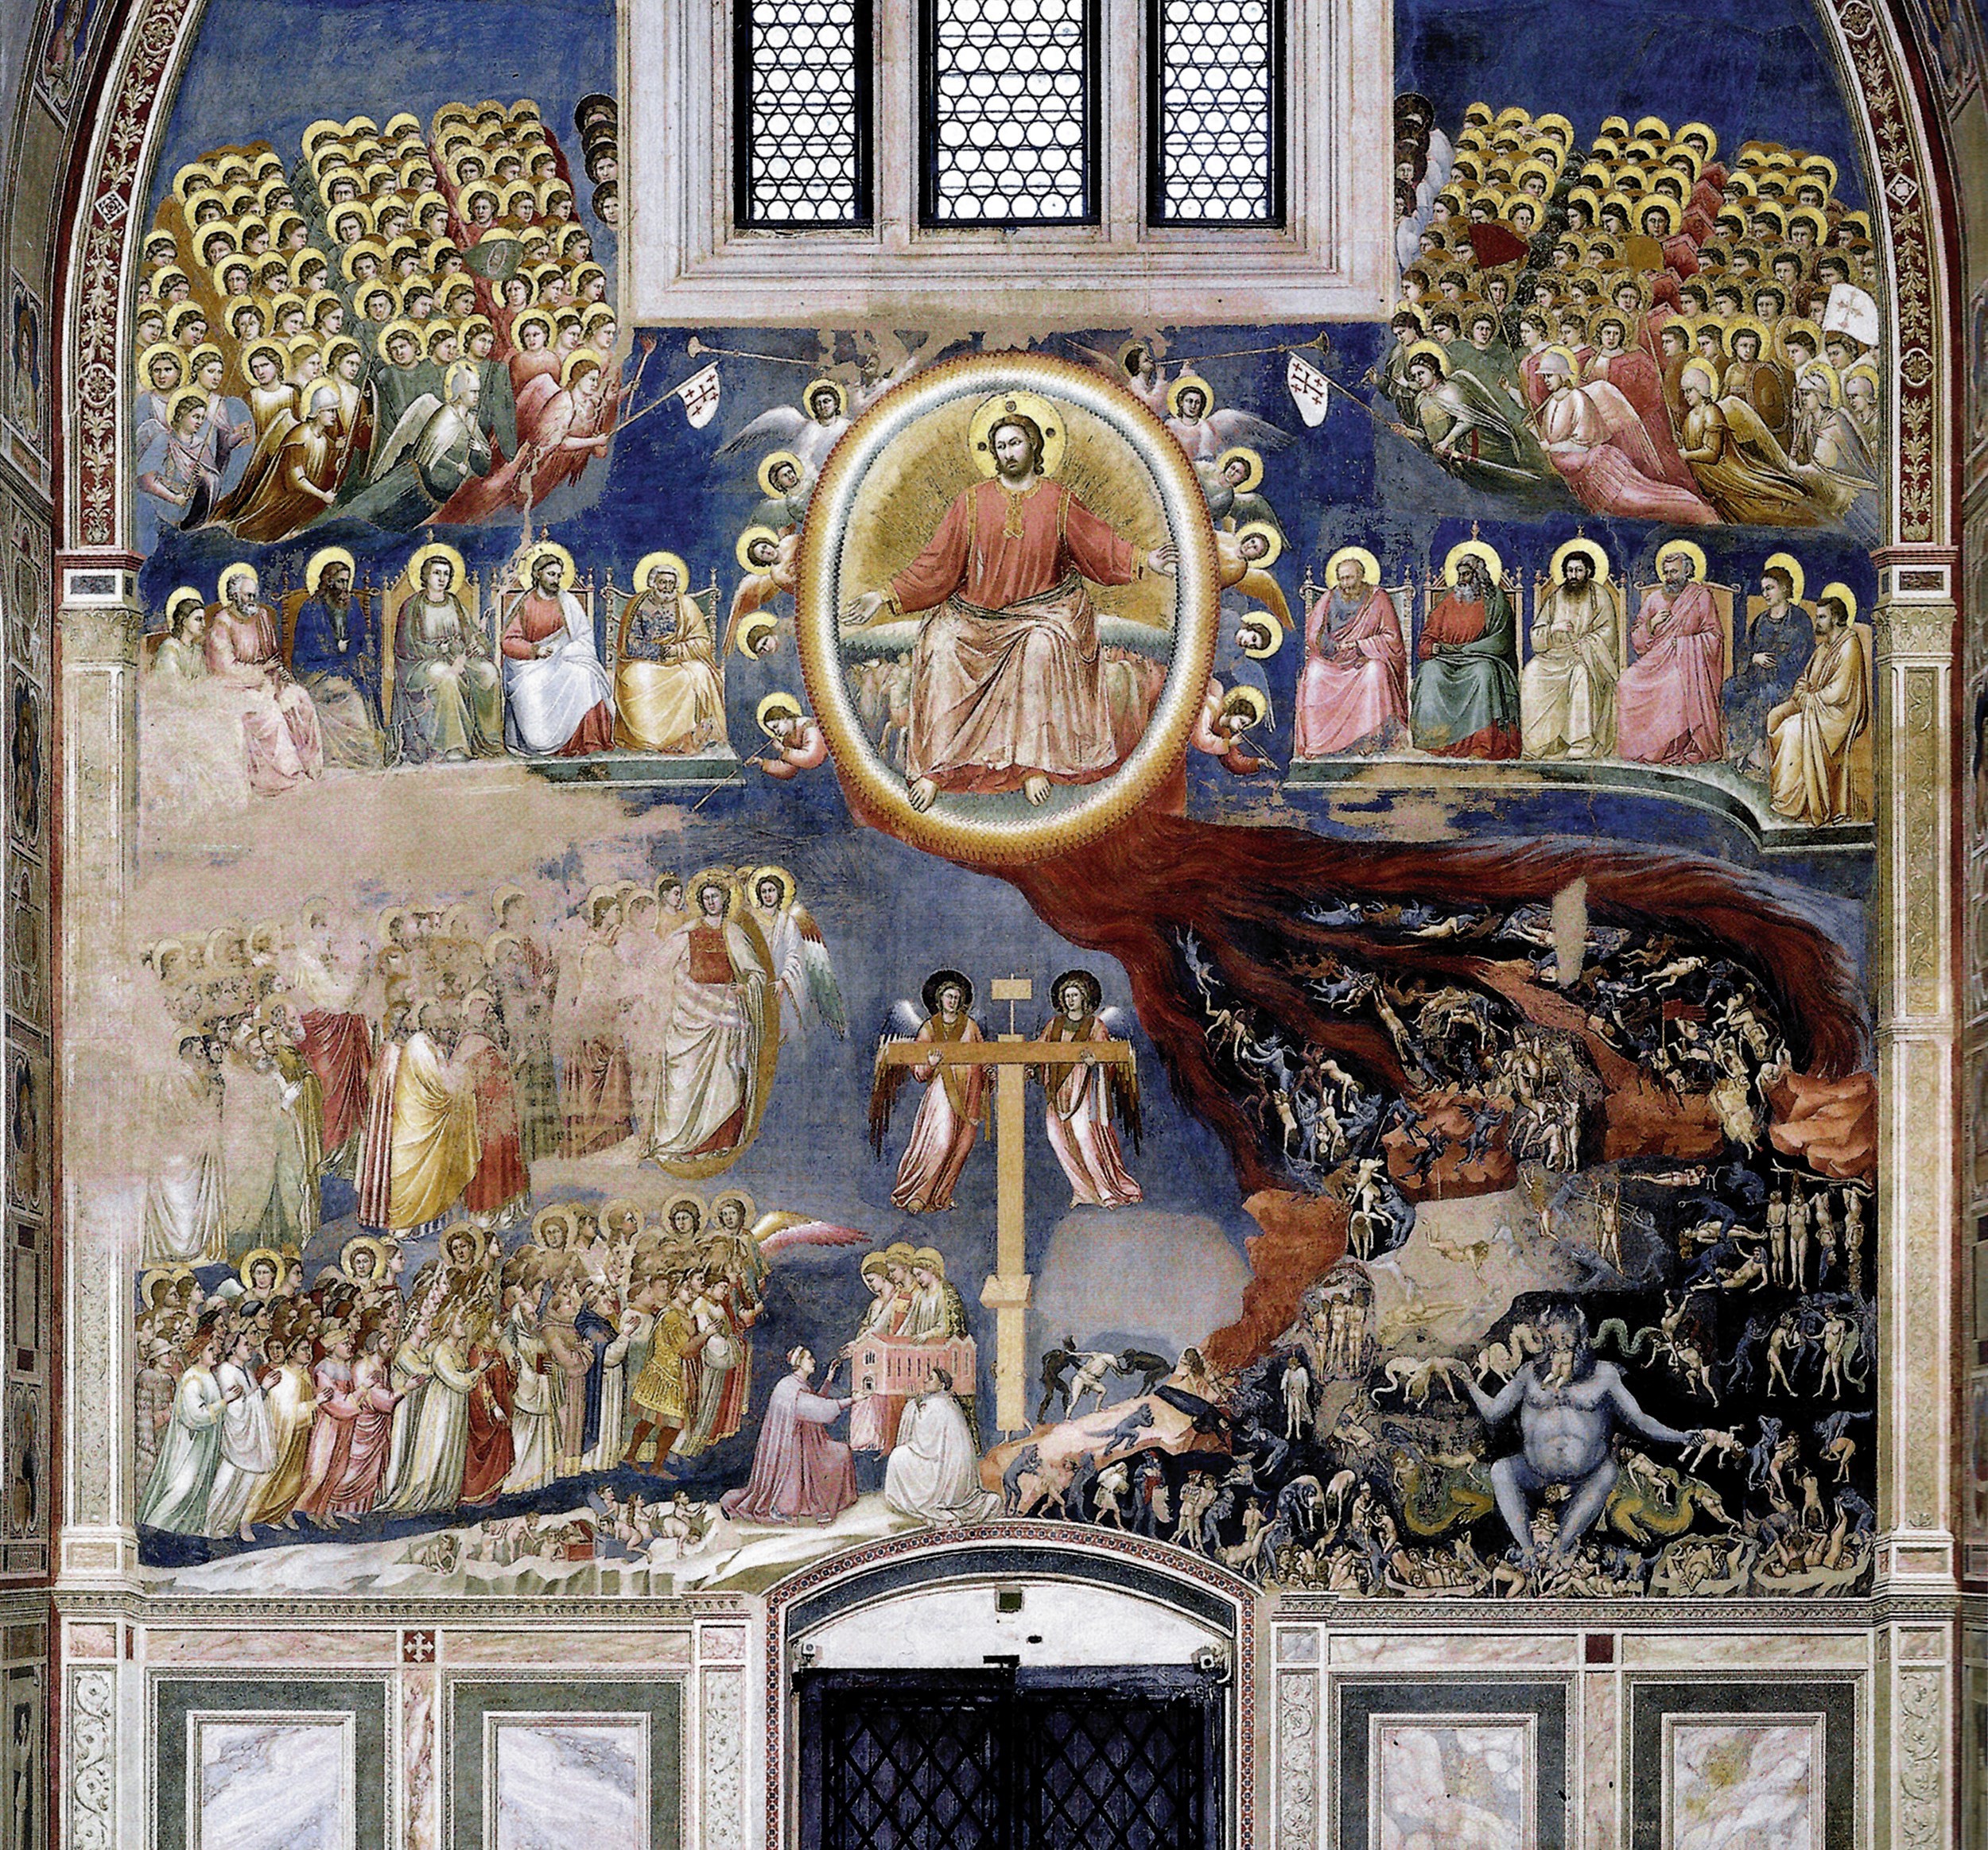 The Last Judgement by Giotto (Illustration) World History Encyclopedia